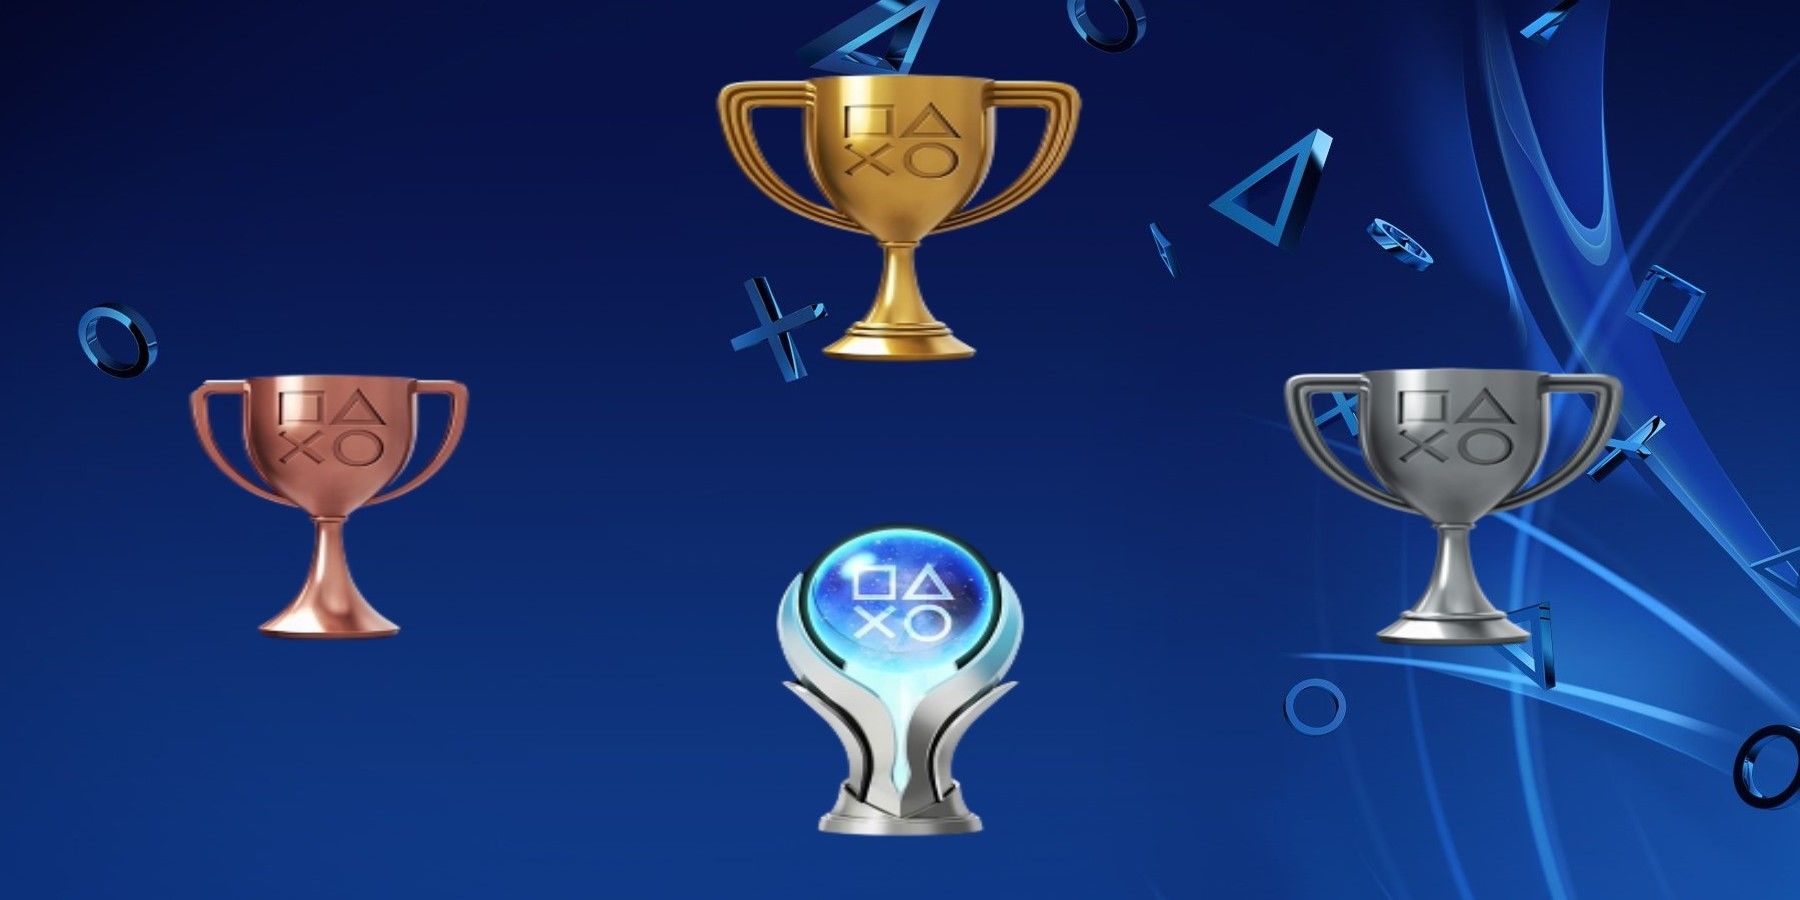 PlayStation Stars Proves That a Proper Trophy Case on PSN is Viable